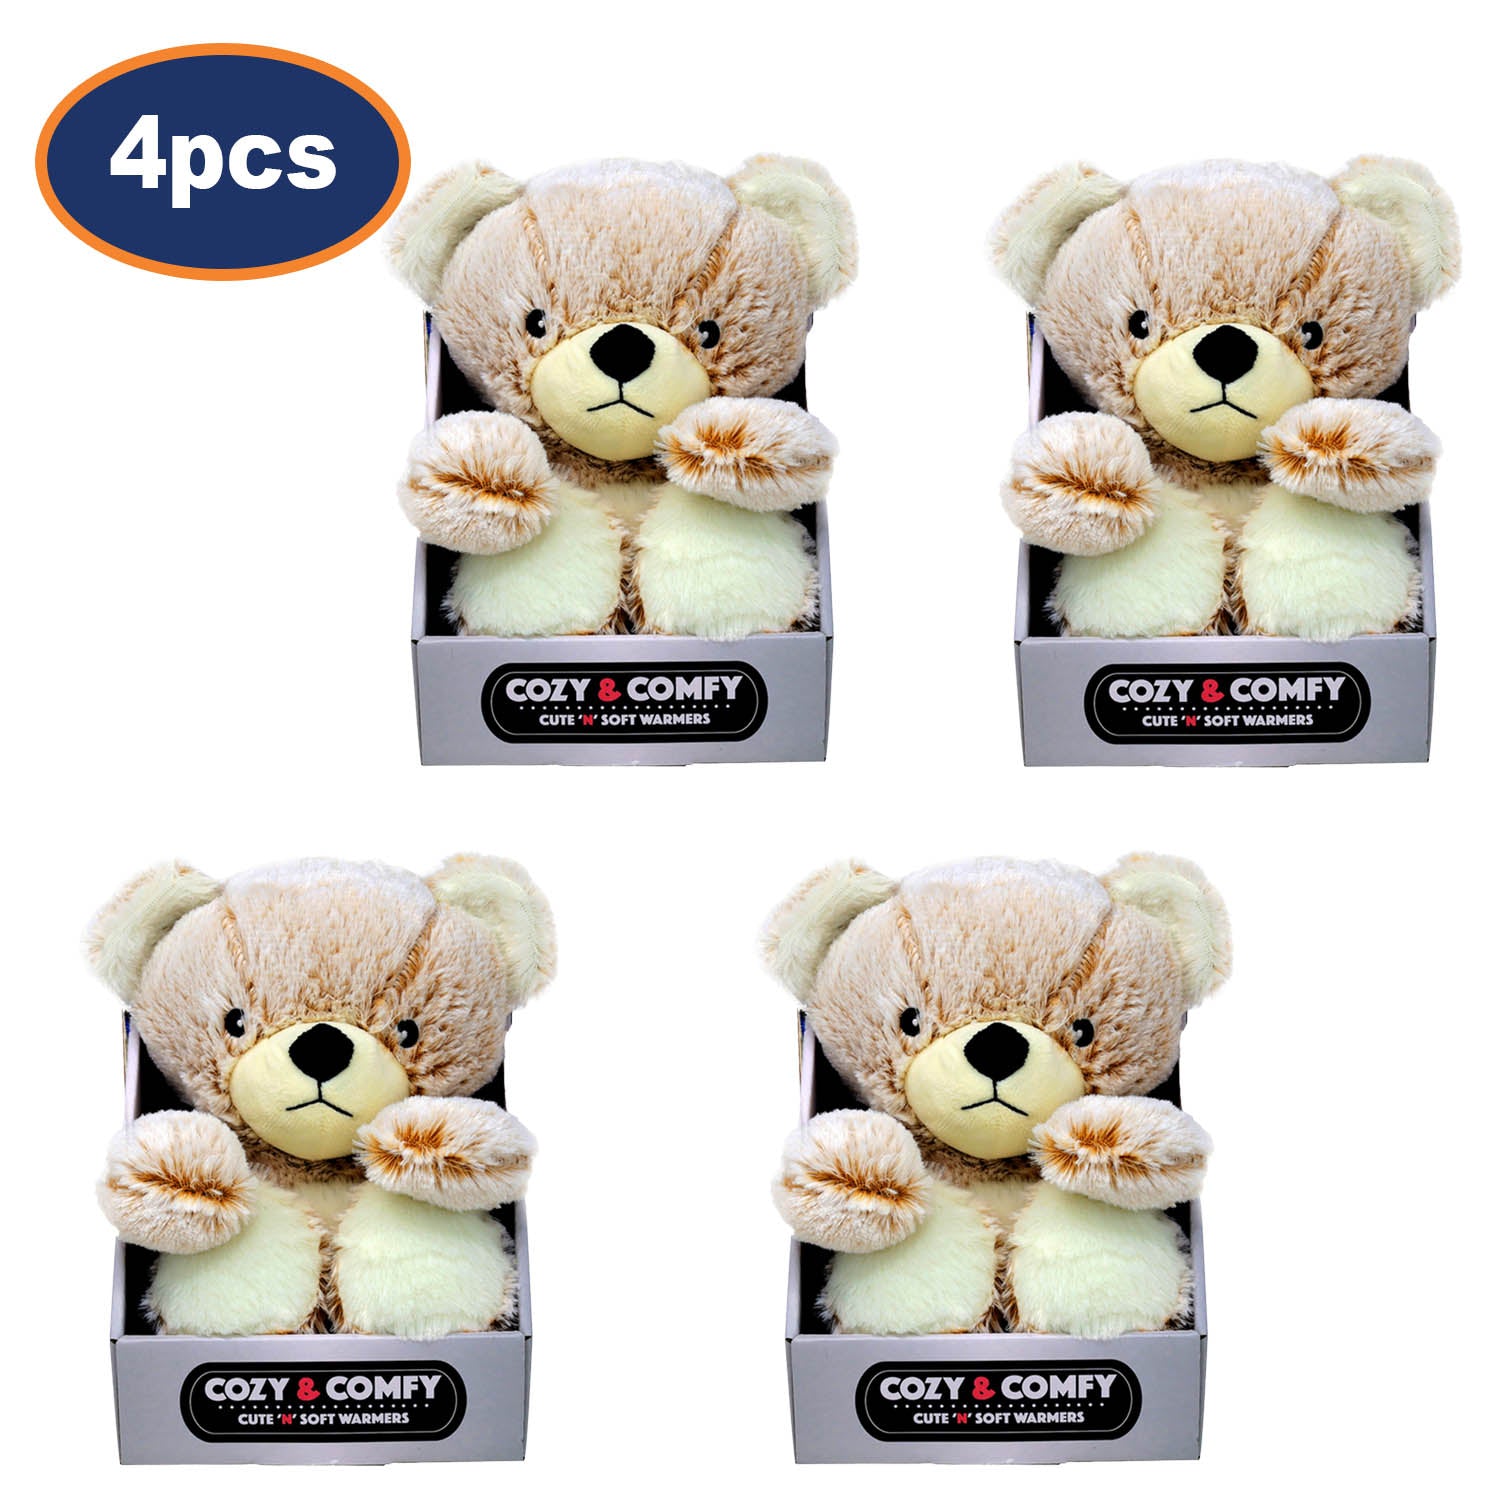 4Pcs Teddy Bear Reusable Hot & Cold Thermal Pack